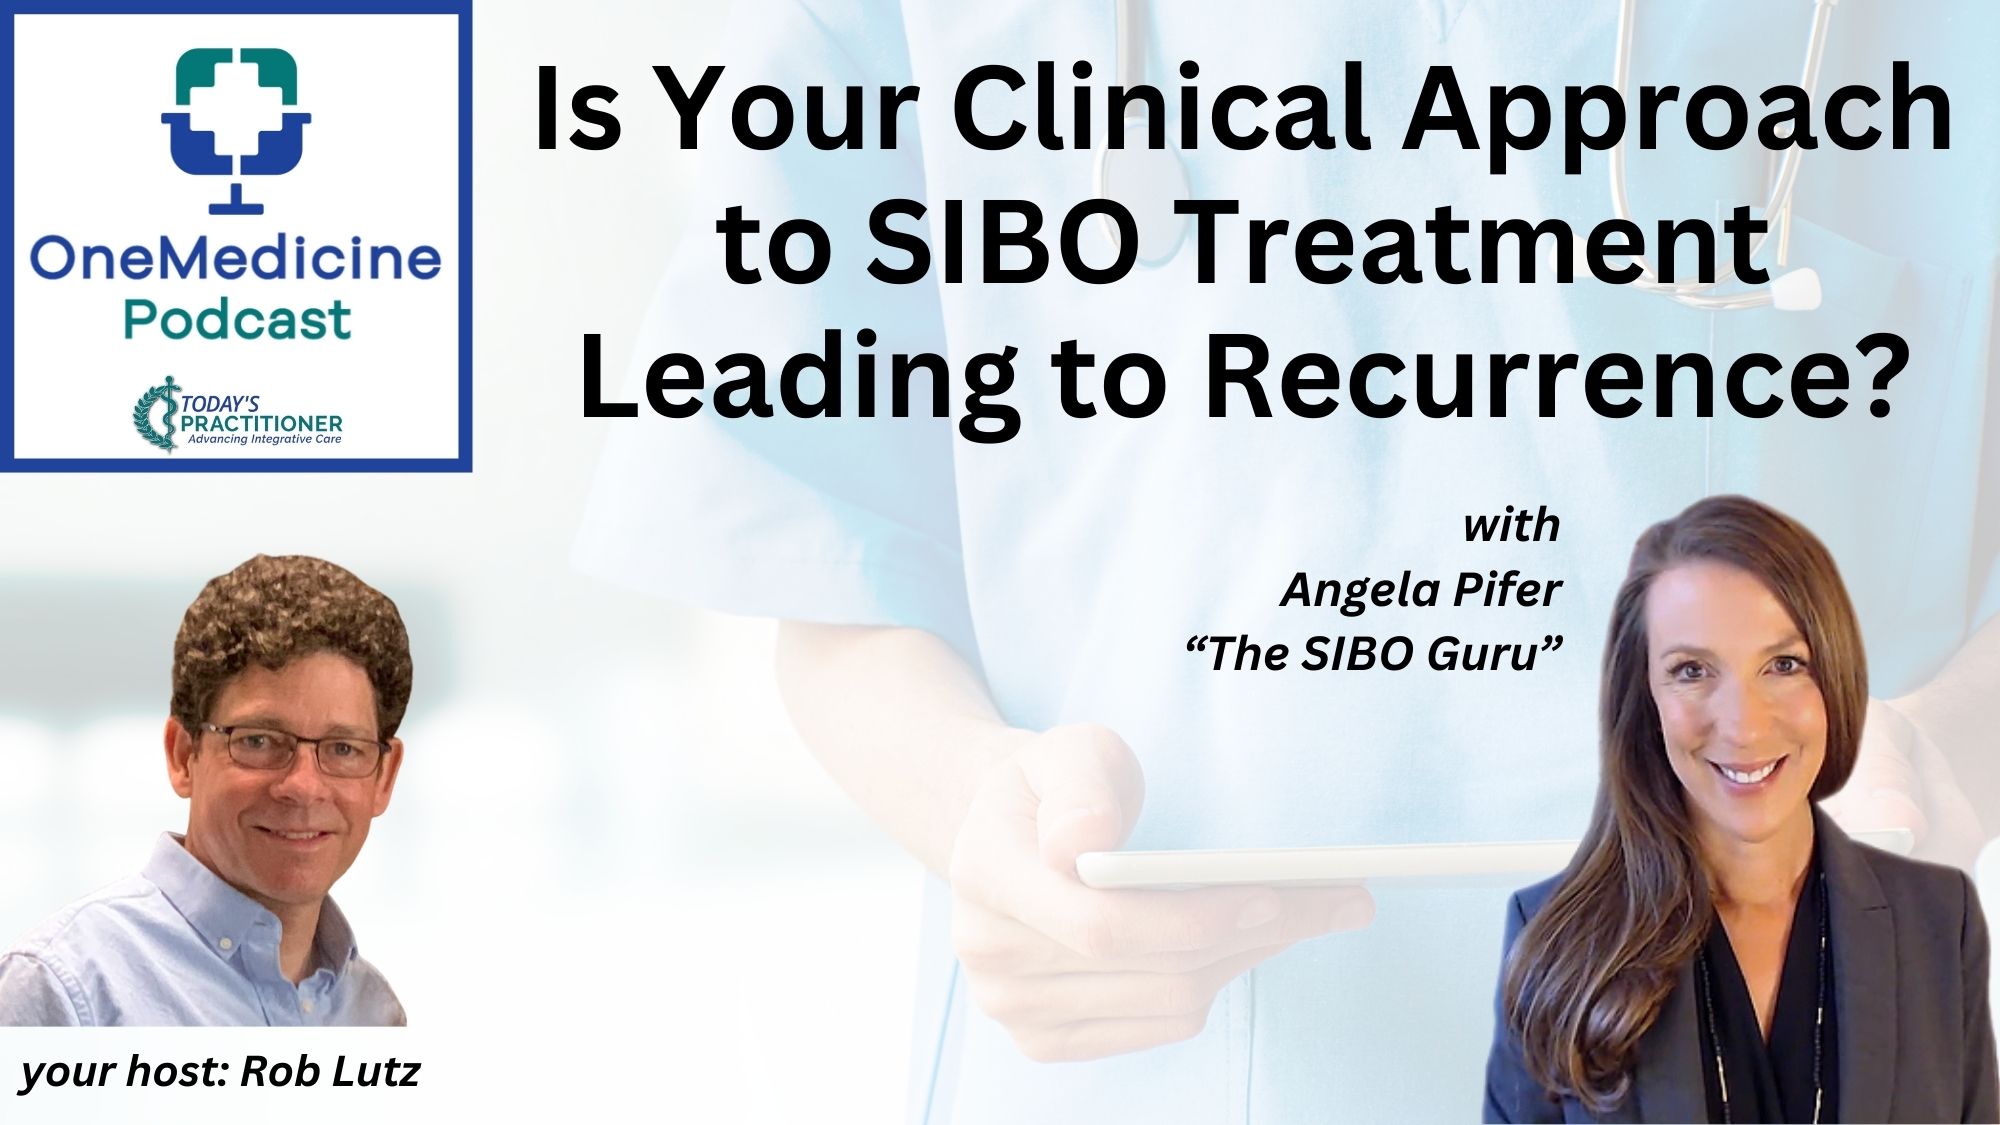 Podcast – Is Your Clinical Approach to SIBO Treatment Leading to Recurrence?